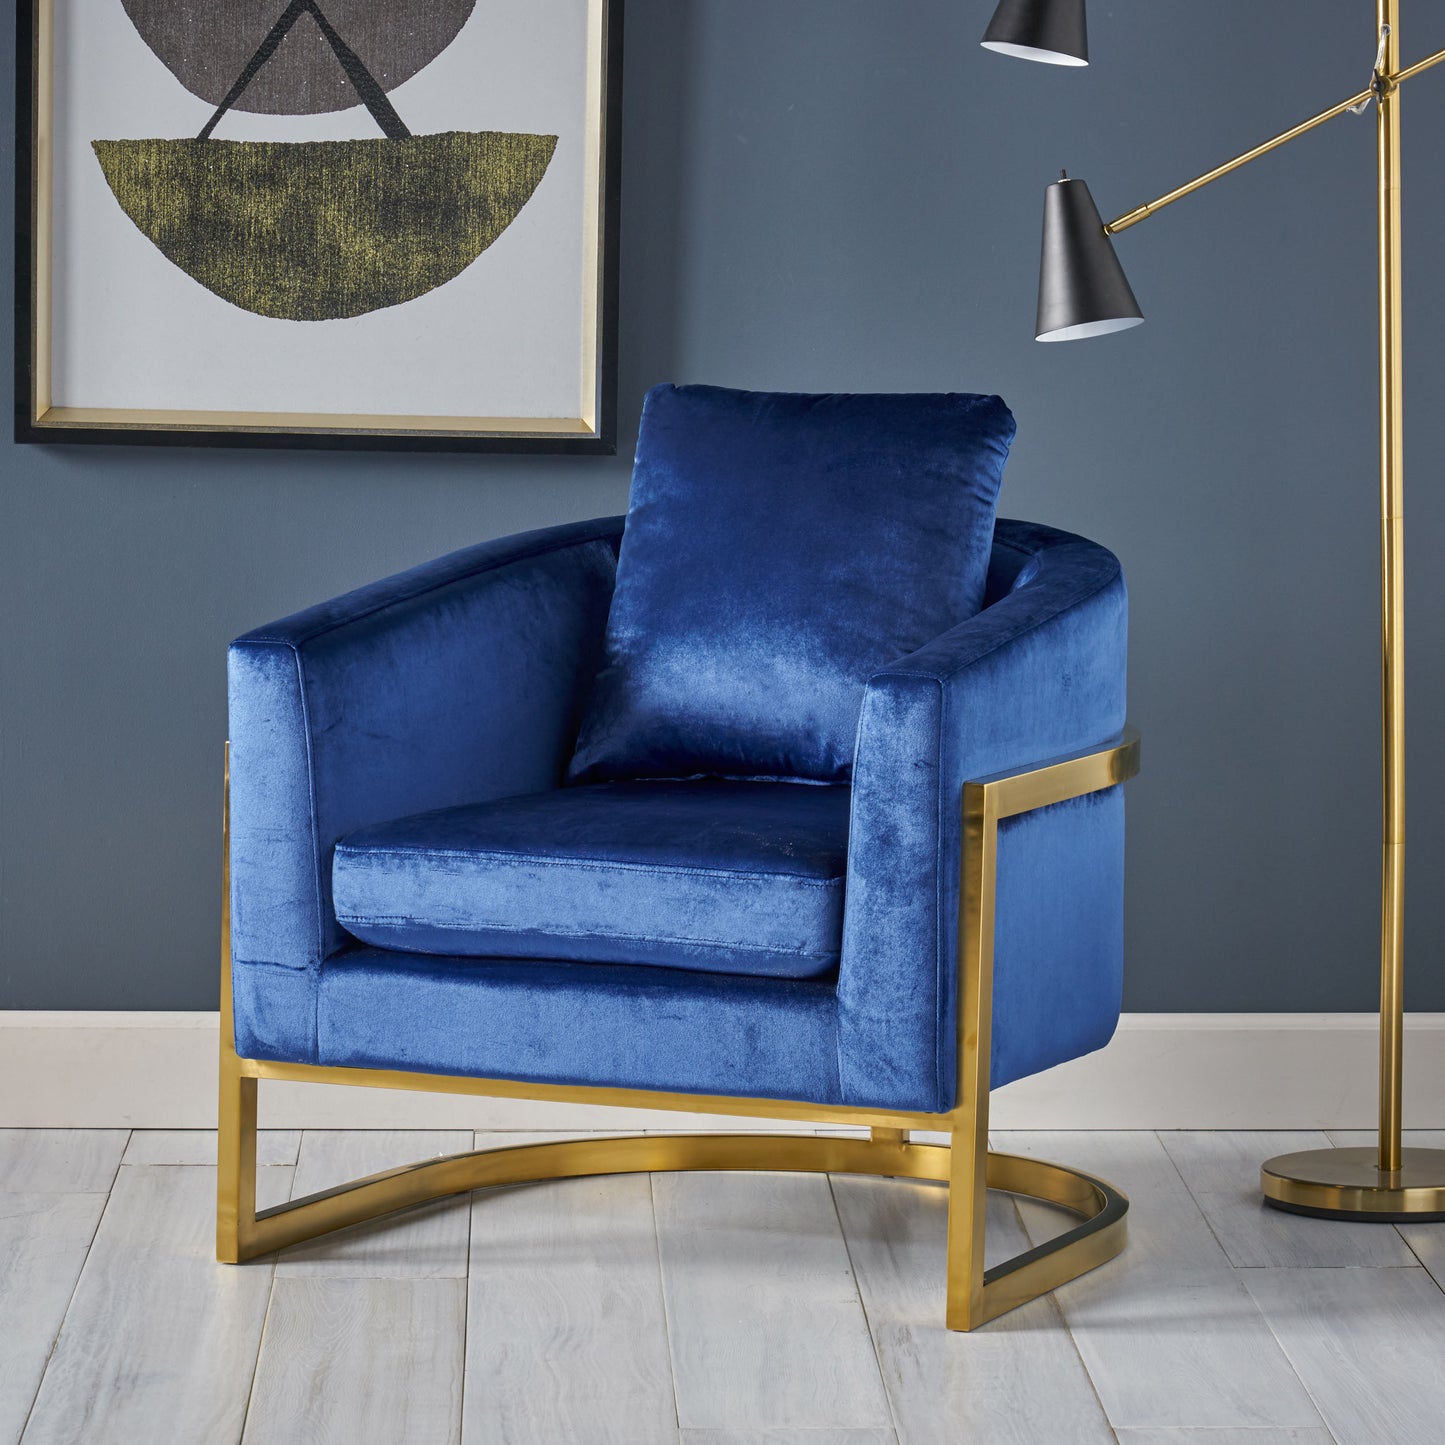 Coldwater Modern Velvet Glam Armchair with Stainless Steel Frame